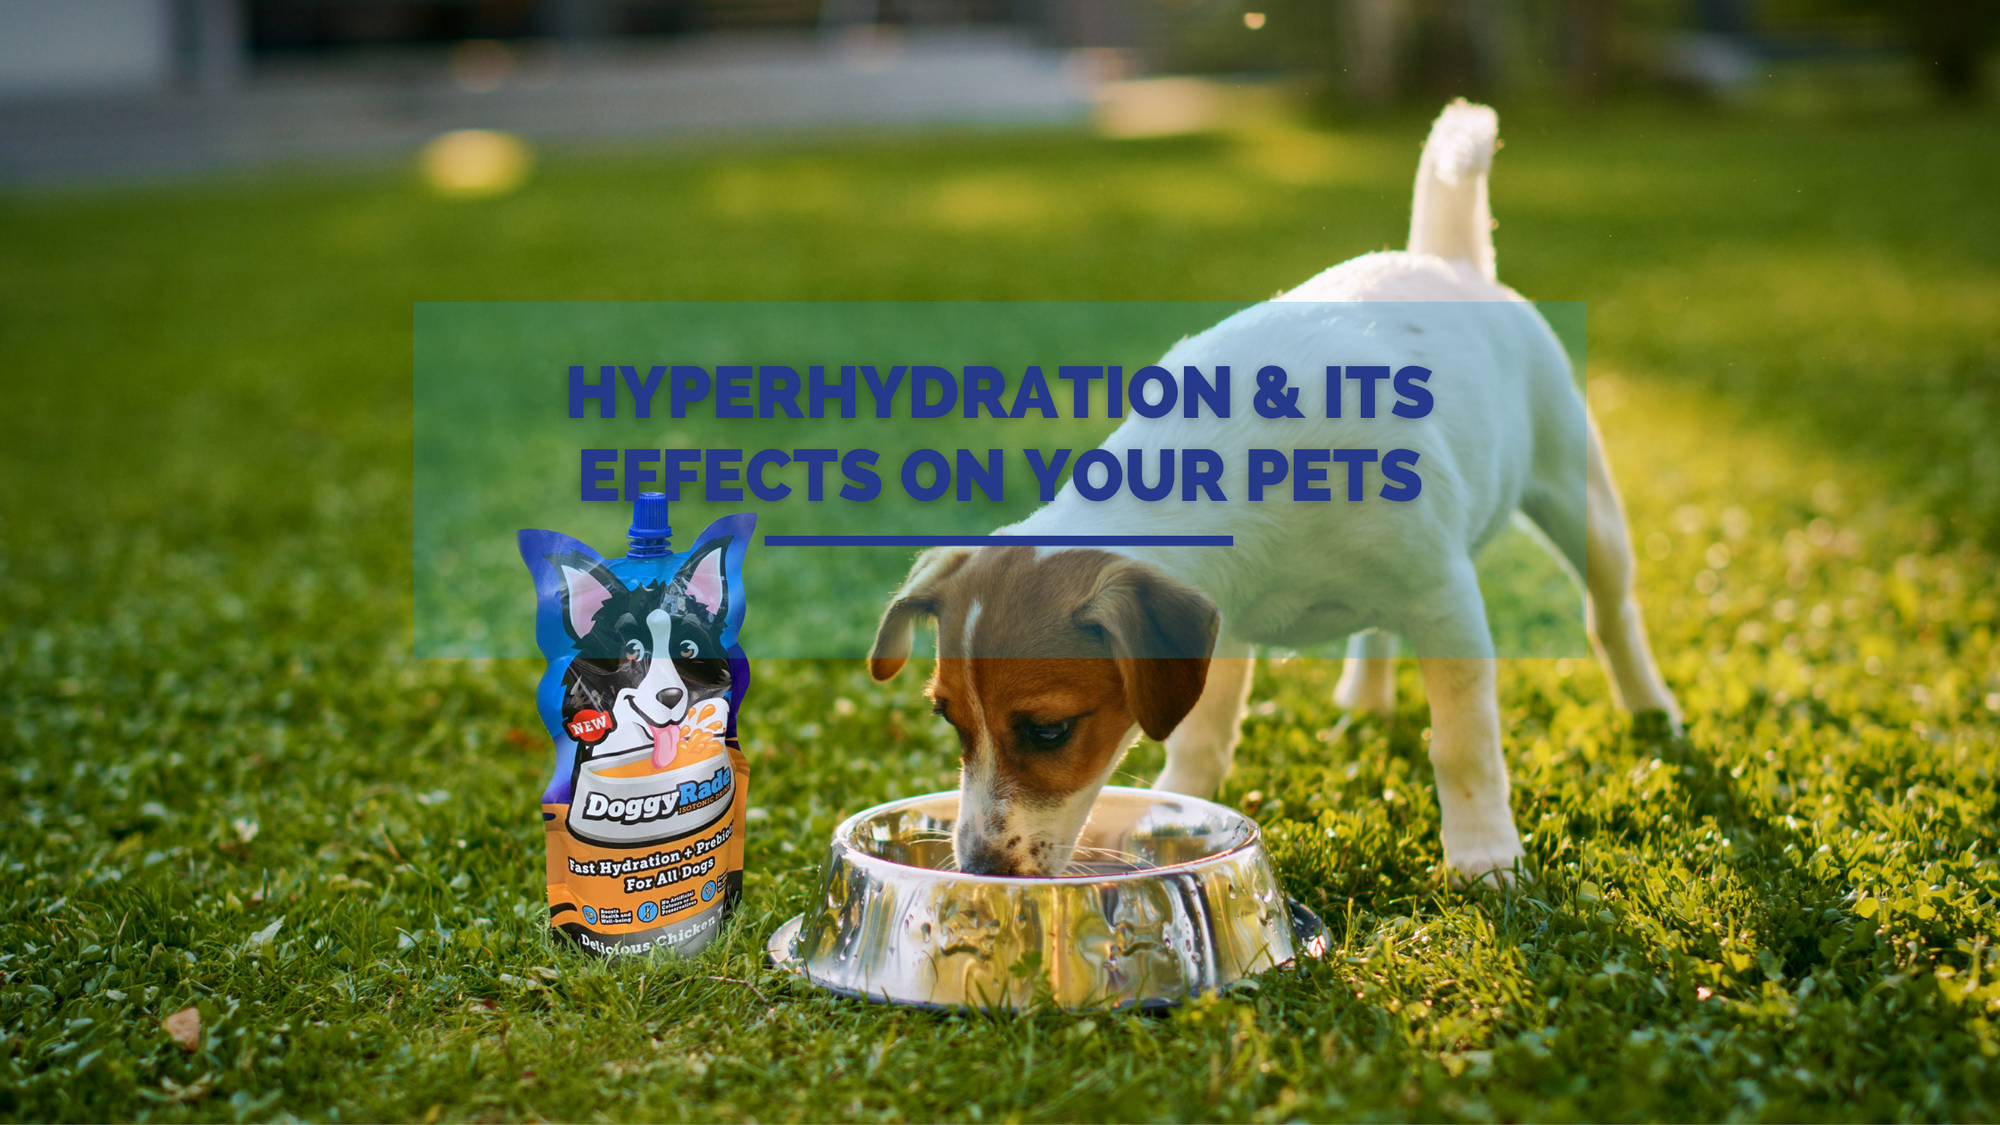 Hyperhydration & its effects on your pets